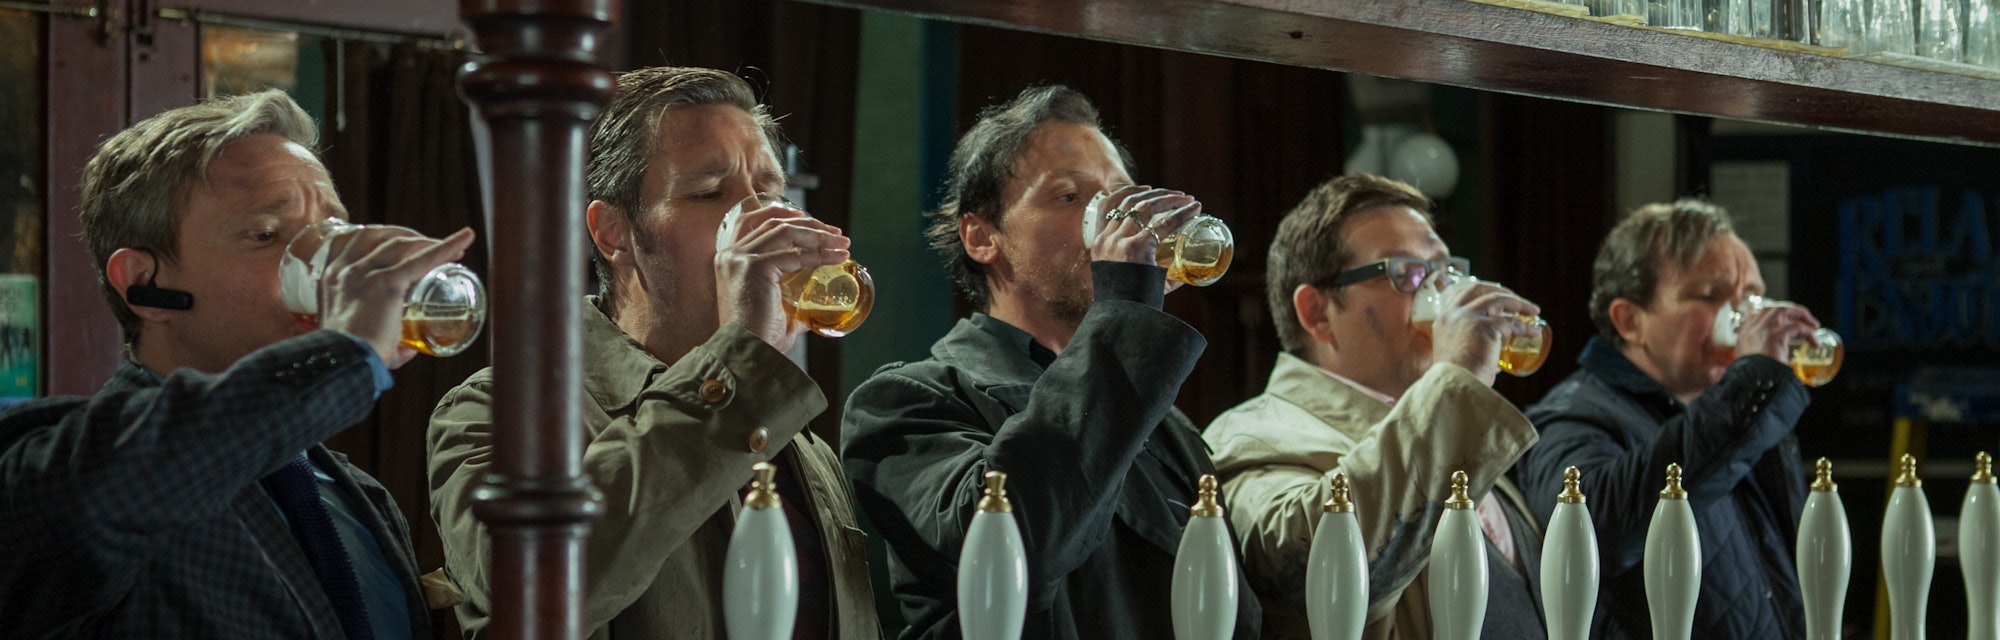 Martin Freeman, Paddy Considine, Simon Pegg, Nick Frost, and Eddie Marsan all drink from their beer ...